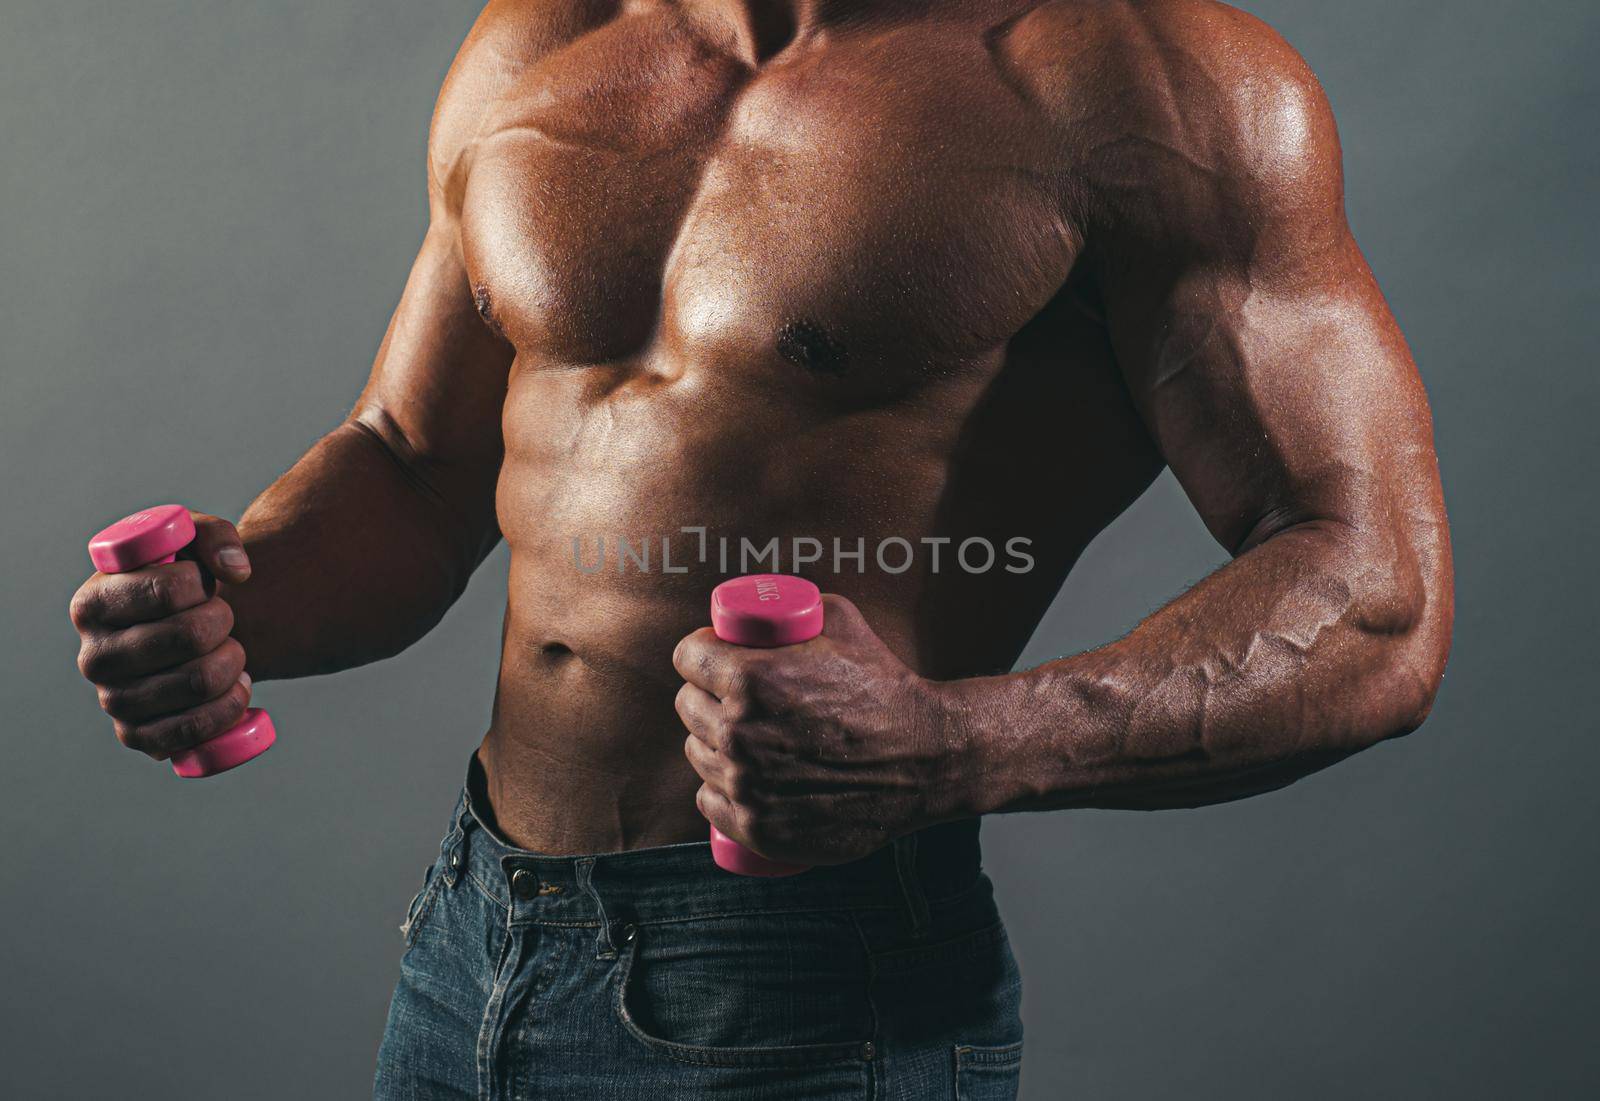 Muscular sexy fitness male body. Man posing shirtless on gray background. Athletic young man with naked torso with dumbbells. Strength and motivation gay concept. Fitness with small dumbbells